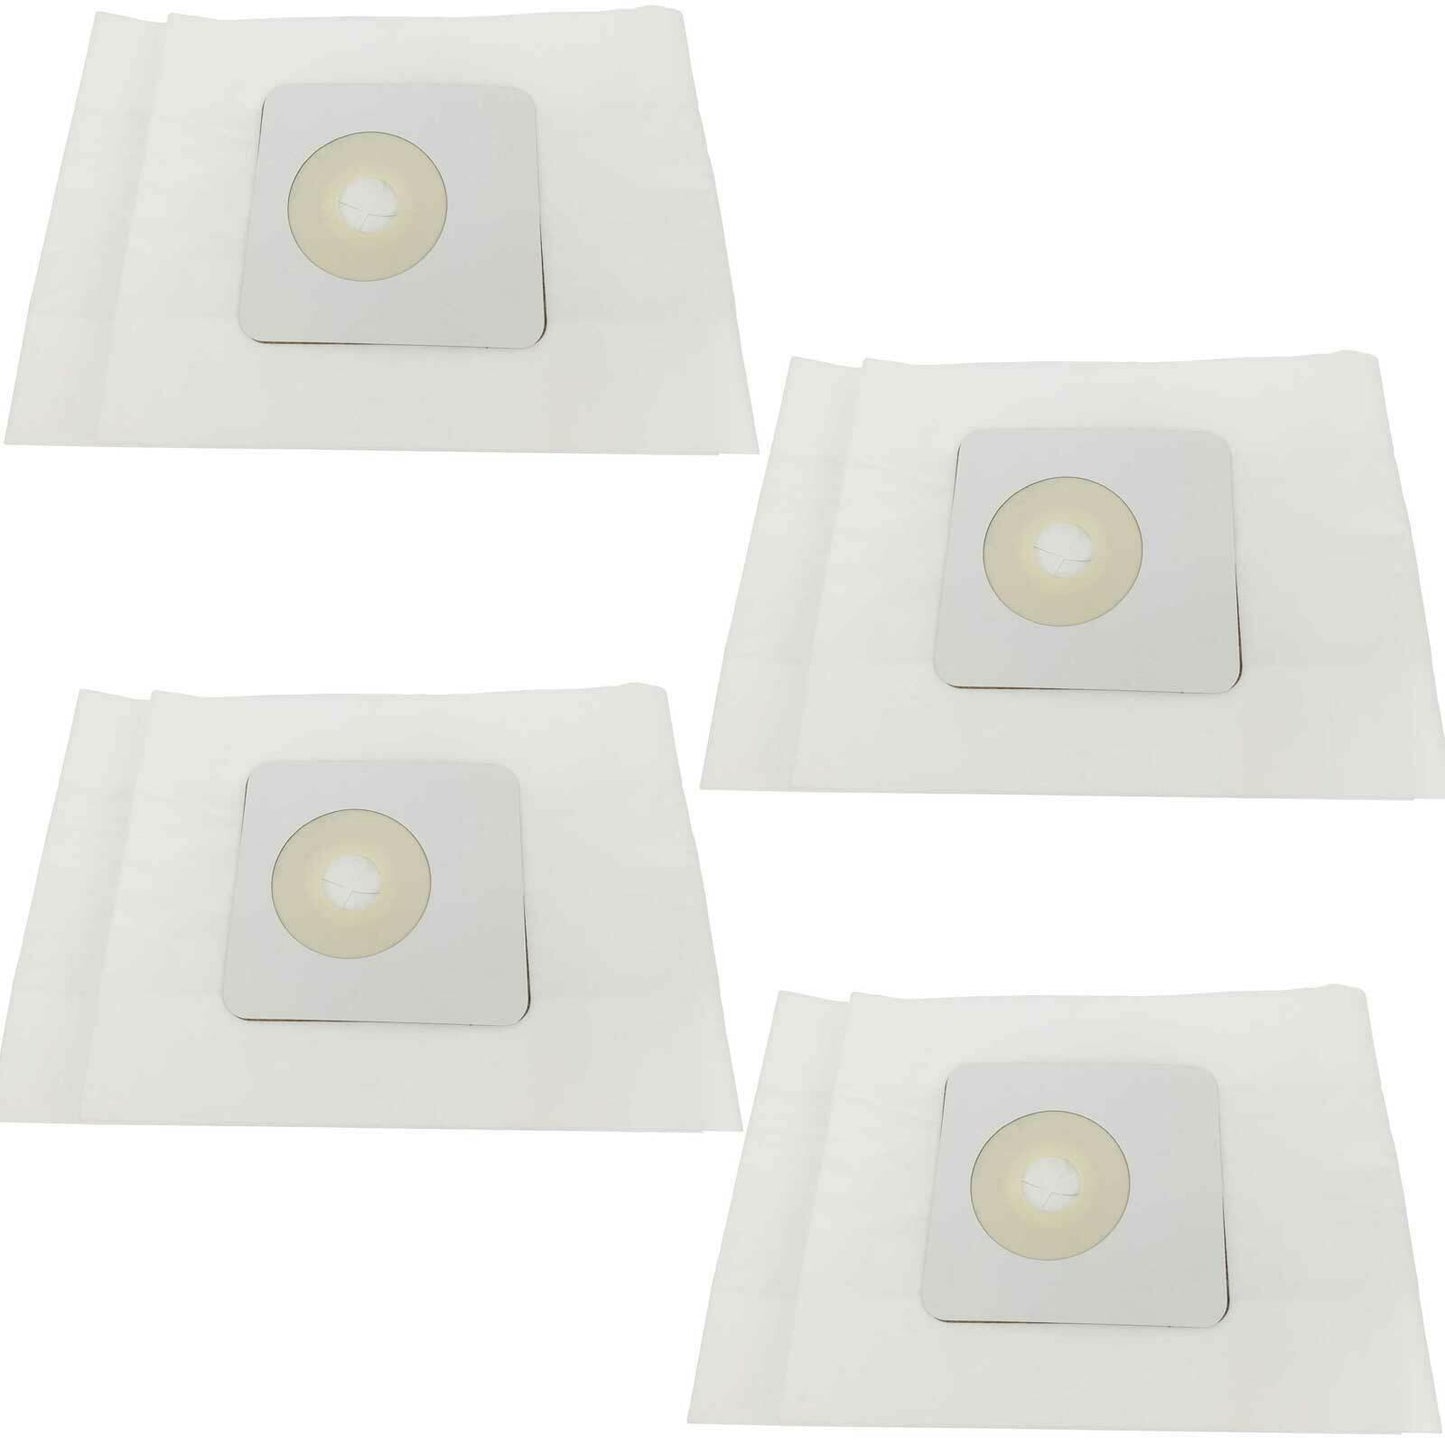 4X Ducted Vacuum Bags For AstroVac VacuMaid Replaces HPB-1 and HPB-2H Sparesbarn